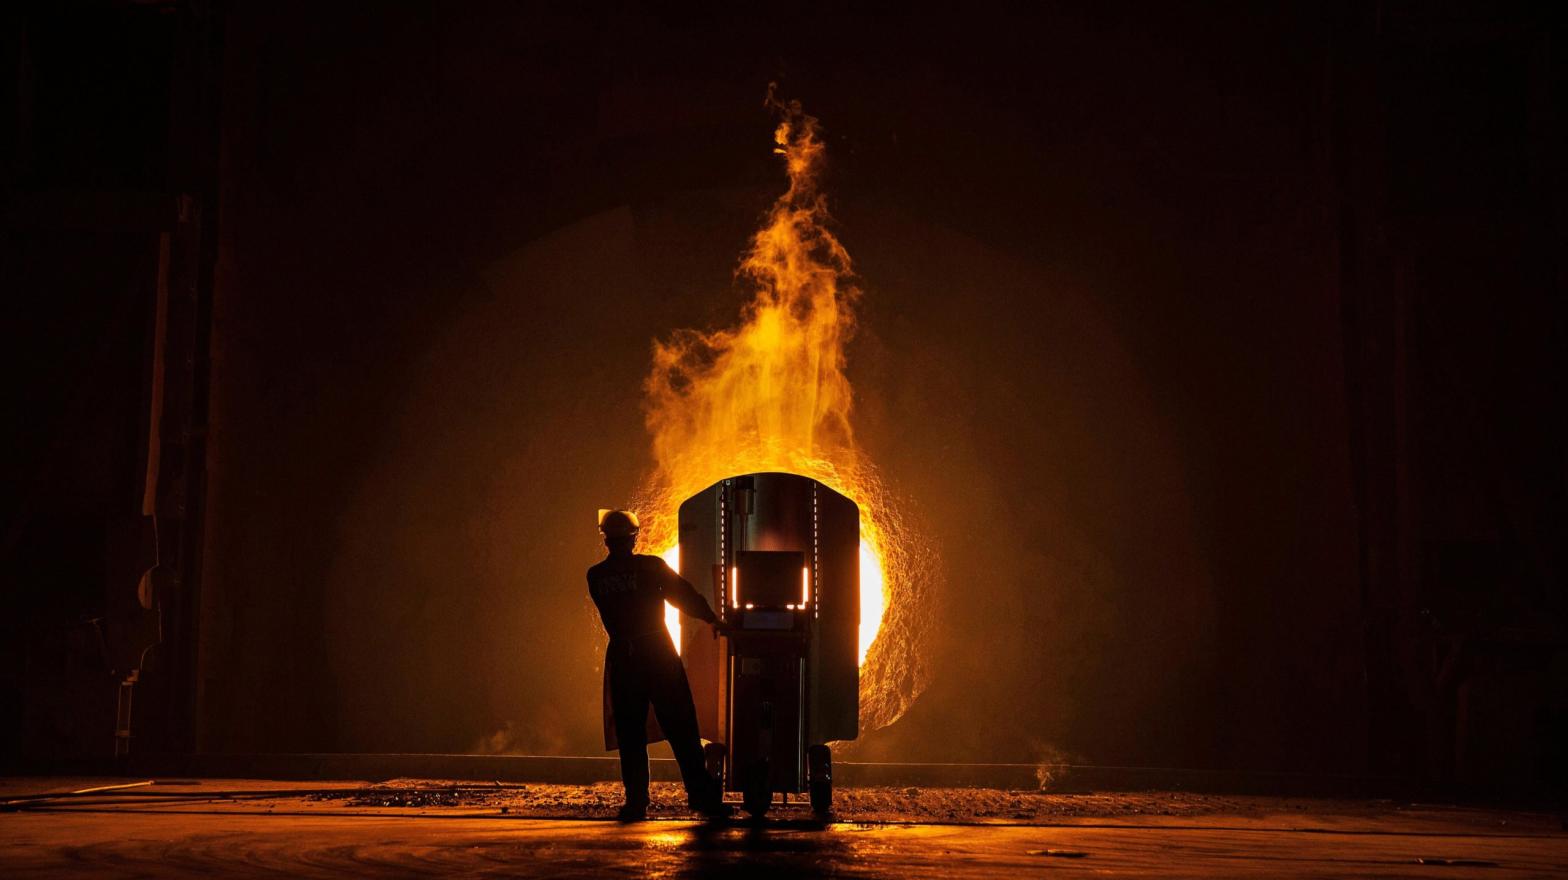 A worker takes samples to measure the quality of molten iron. (Photo: Kevin Frayer, Getty Images)